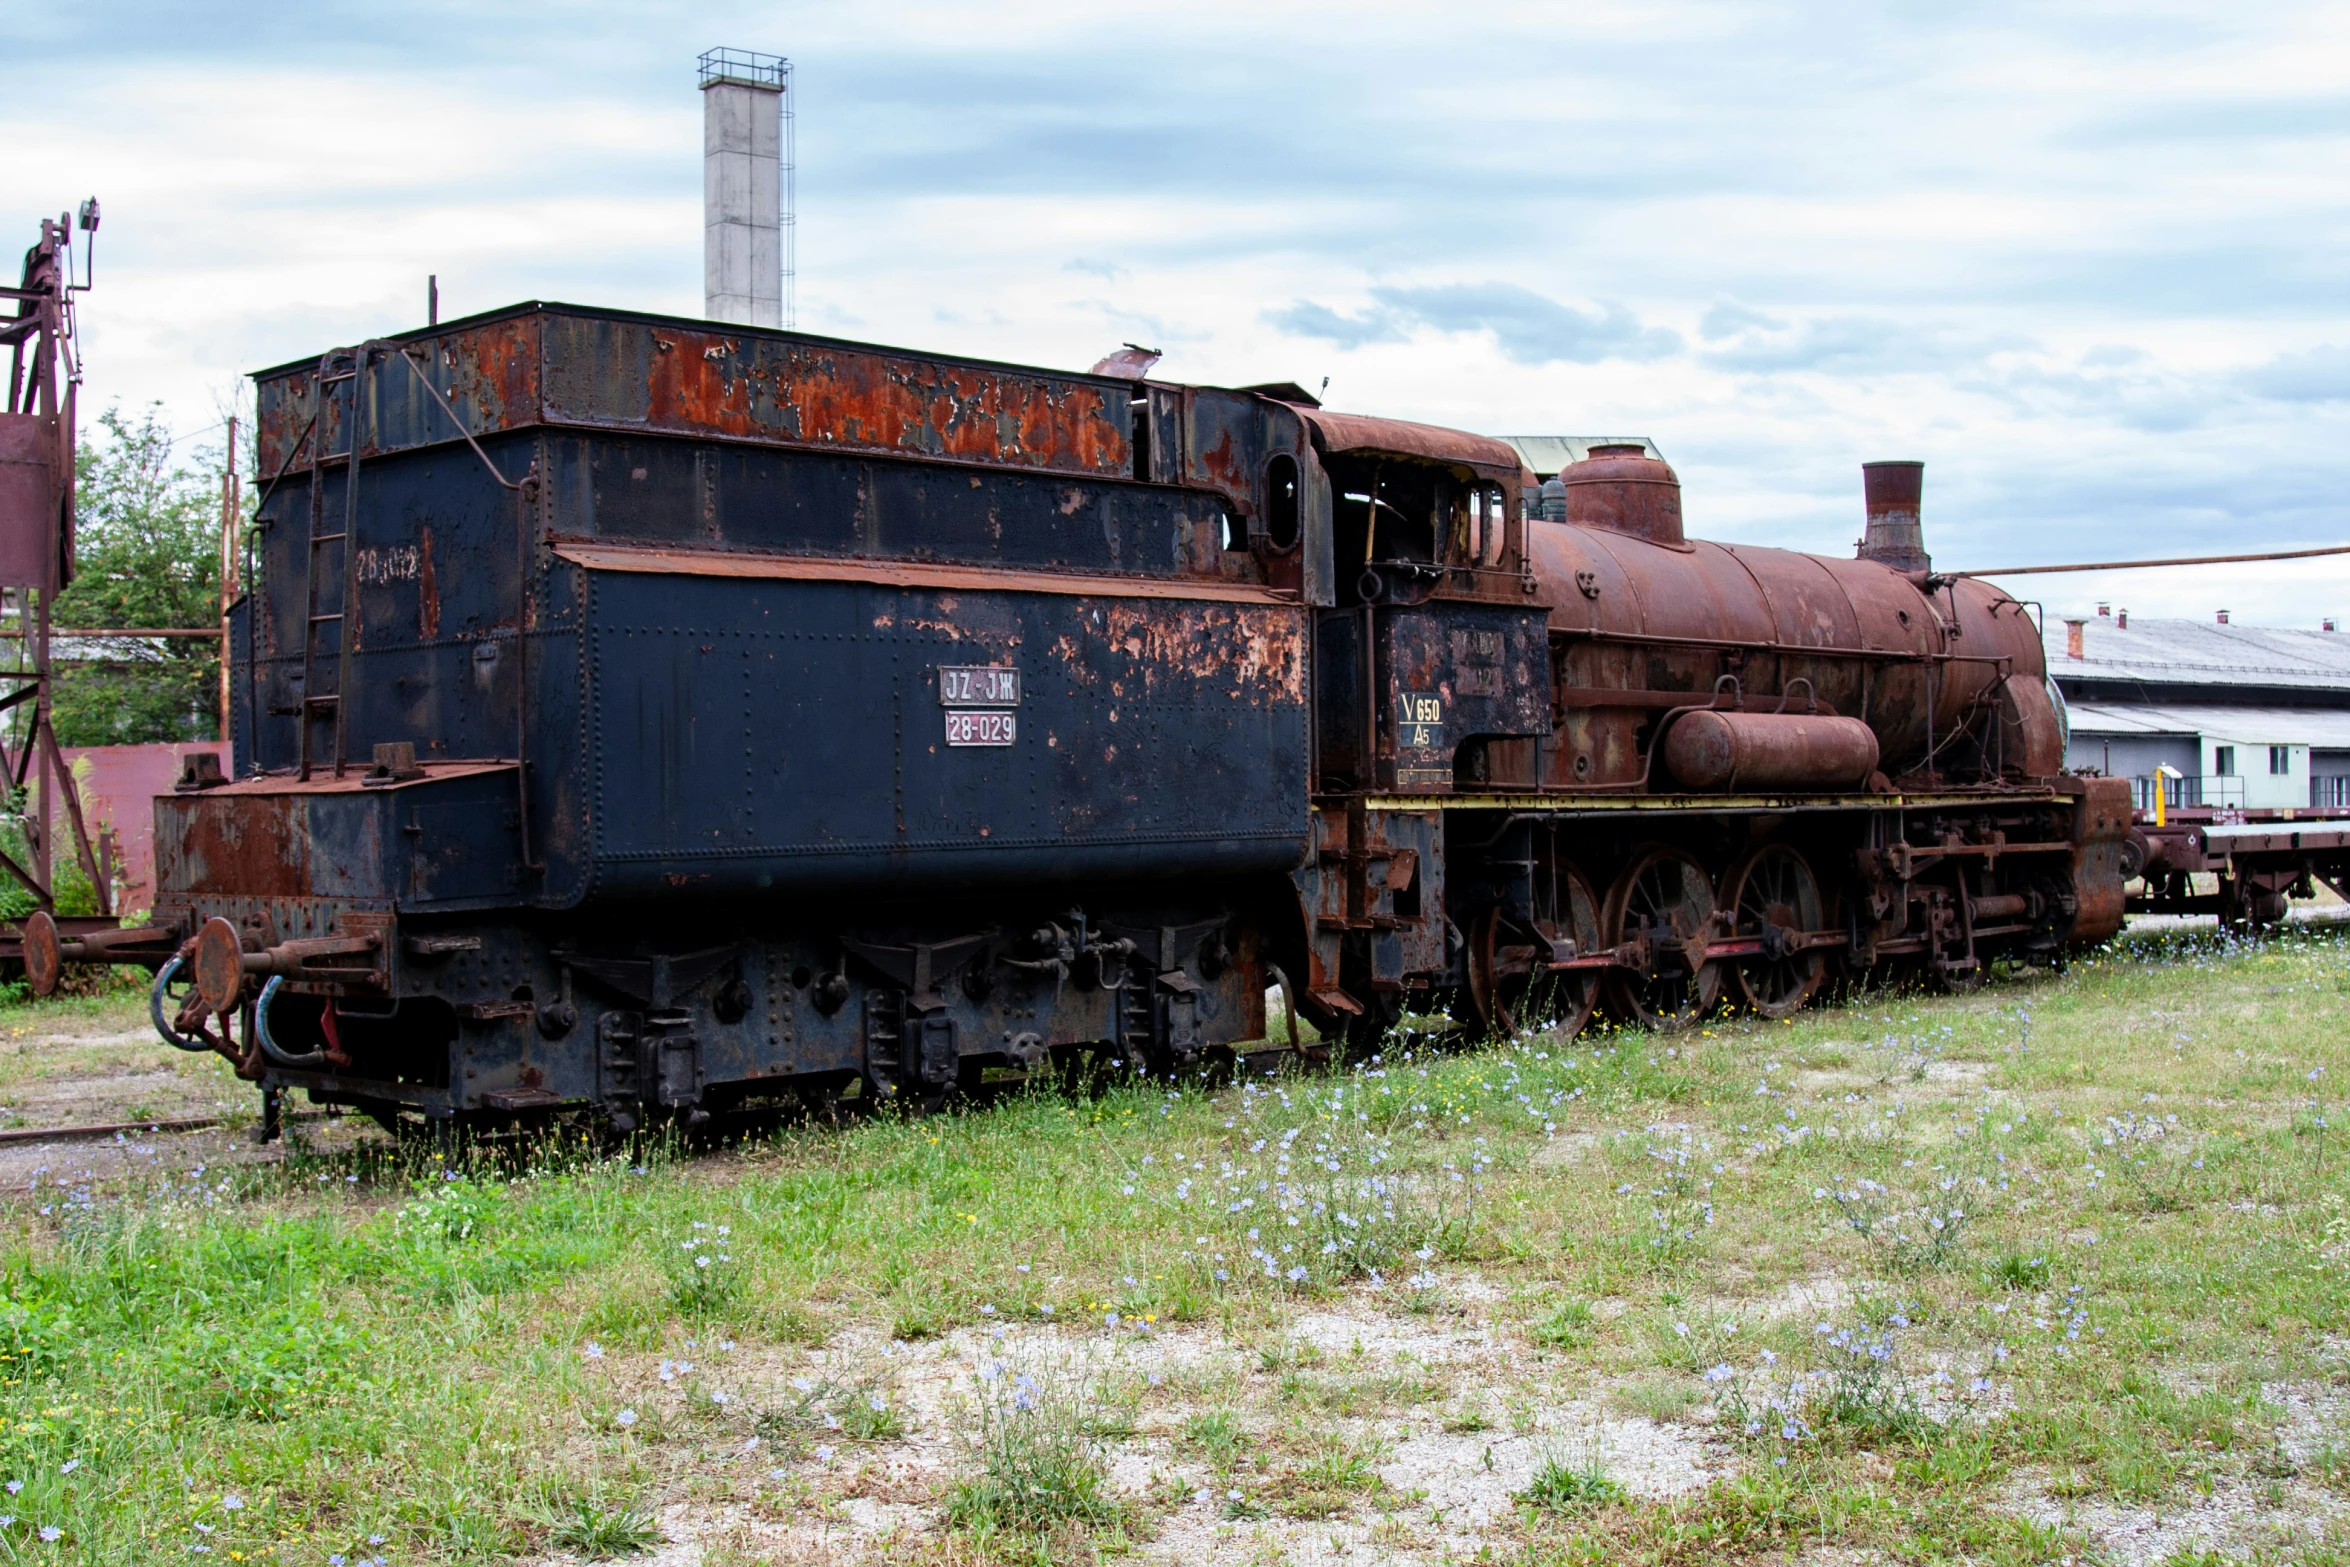 there is a old train that is sitting outside